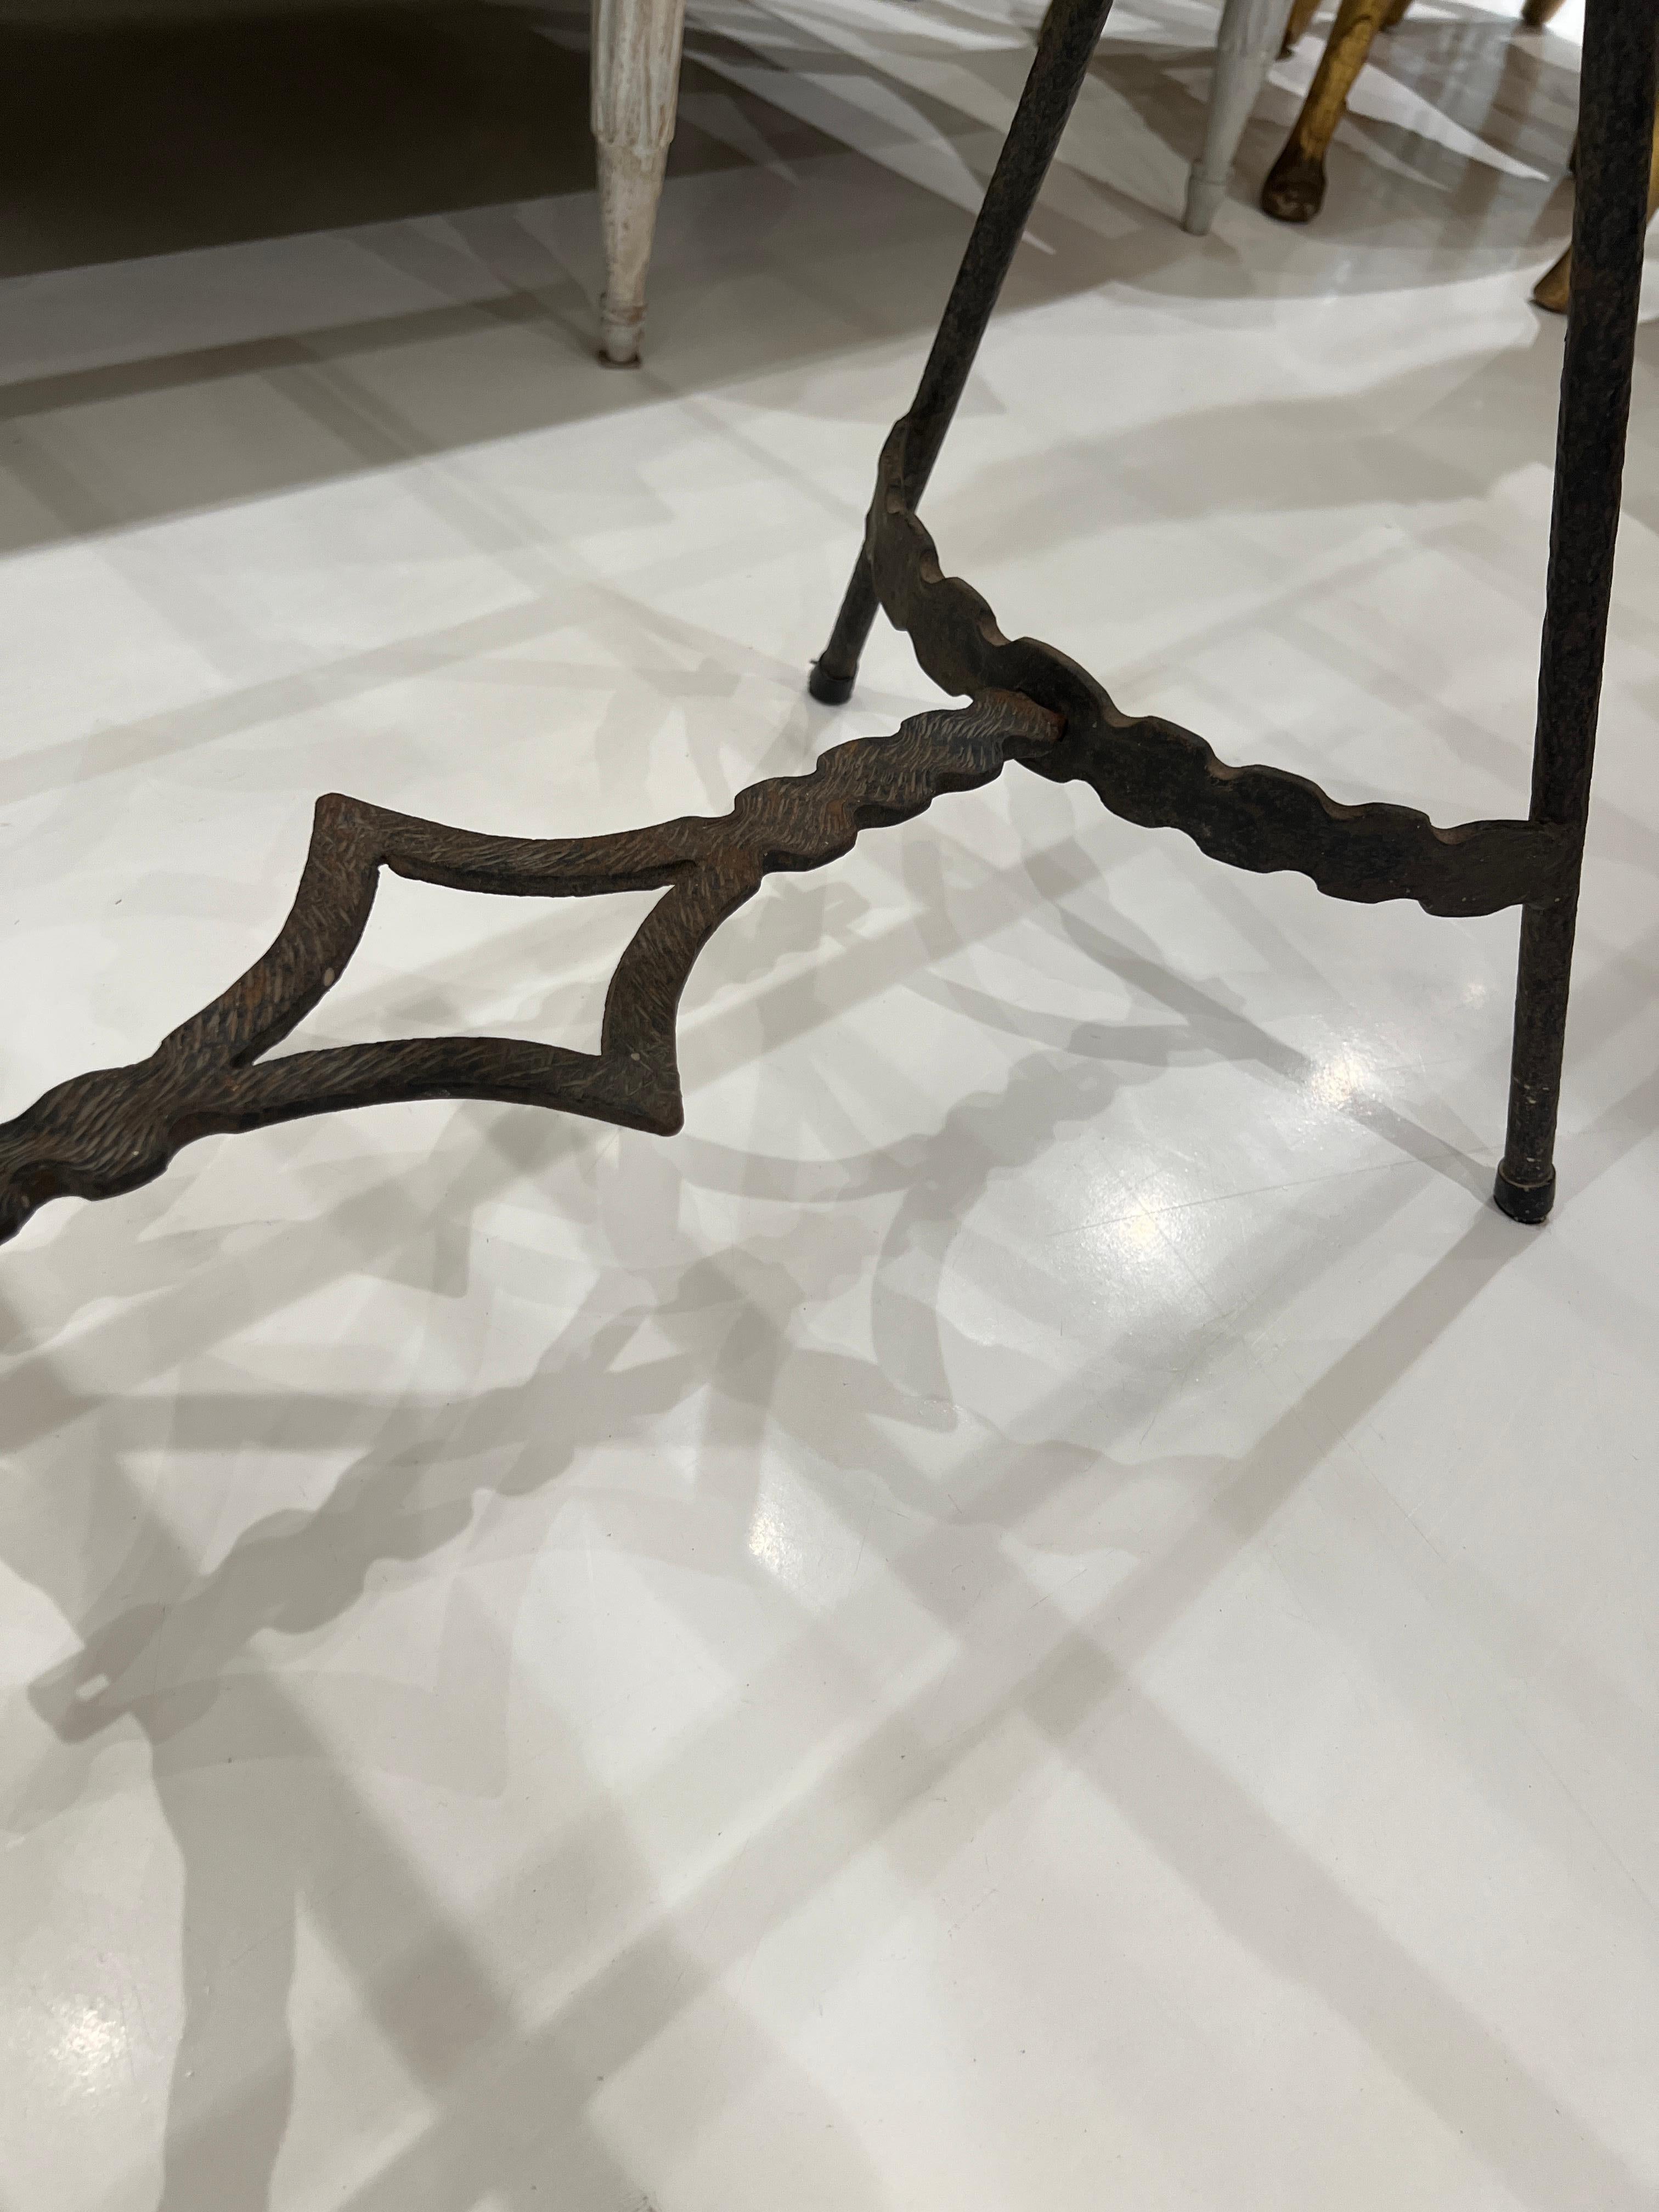 Wrought iron table with interesting details at the base.  New limestone top has been installed.